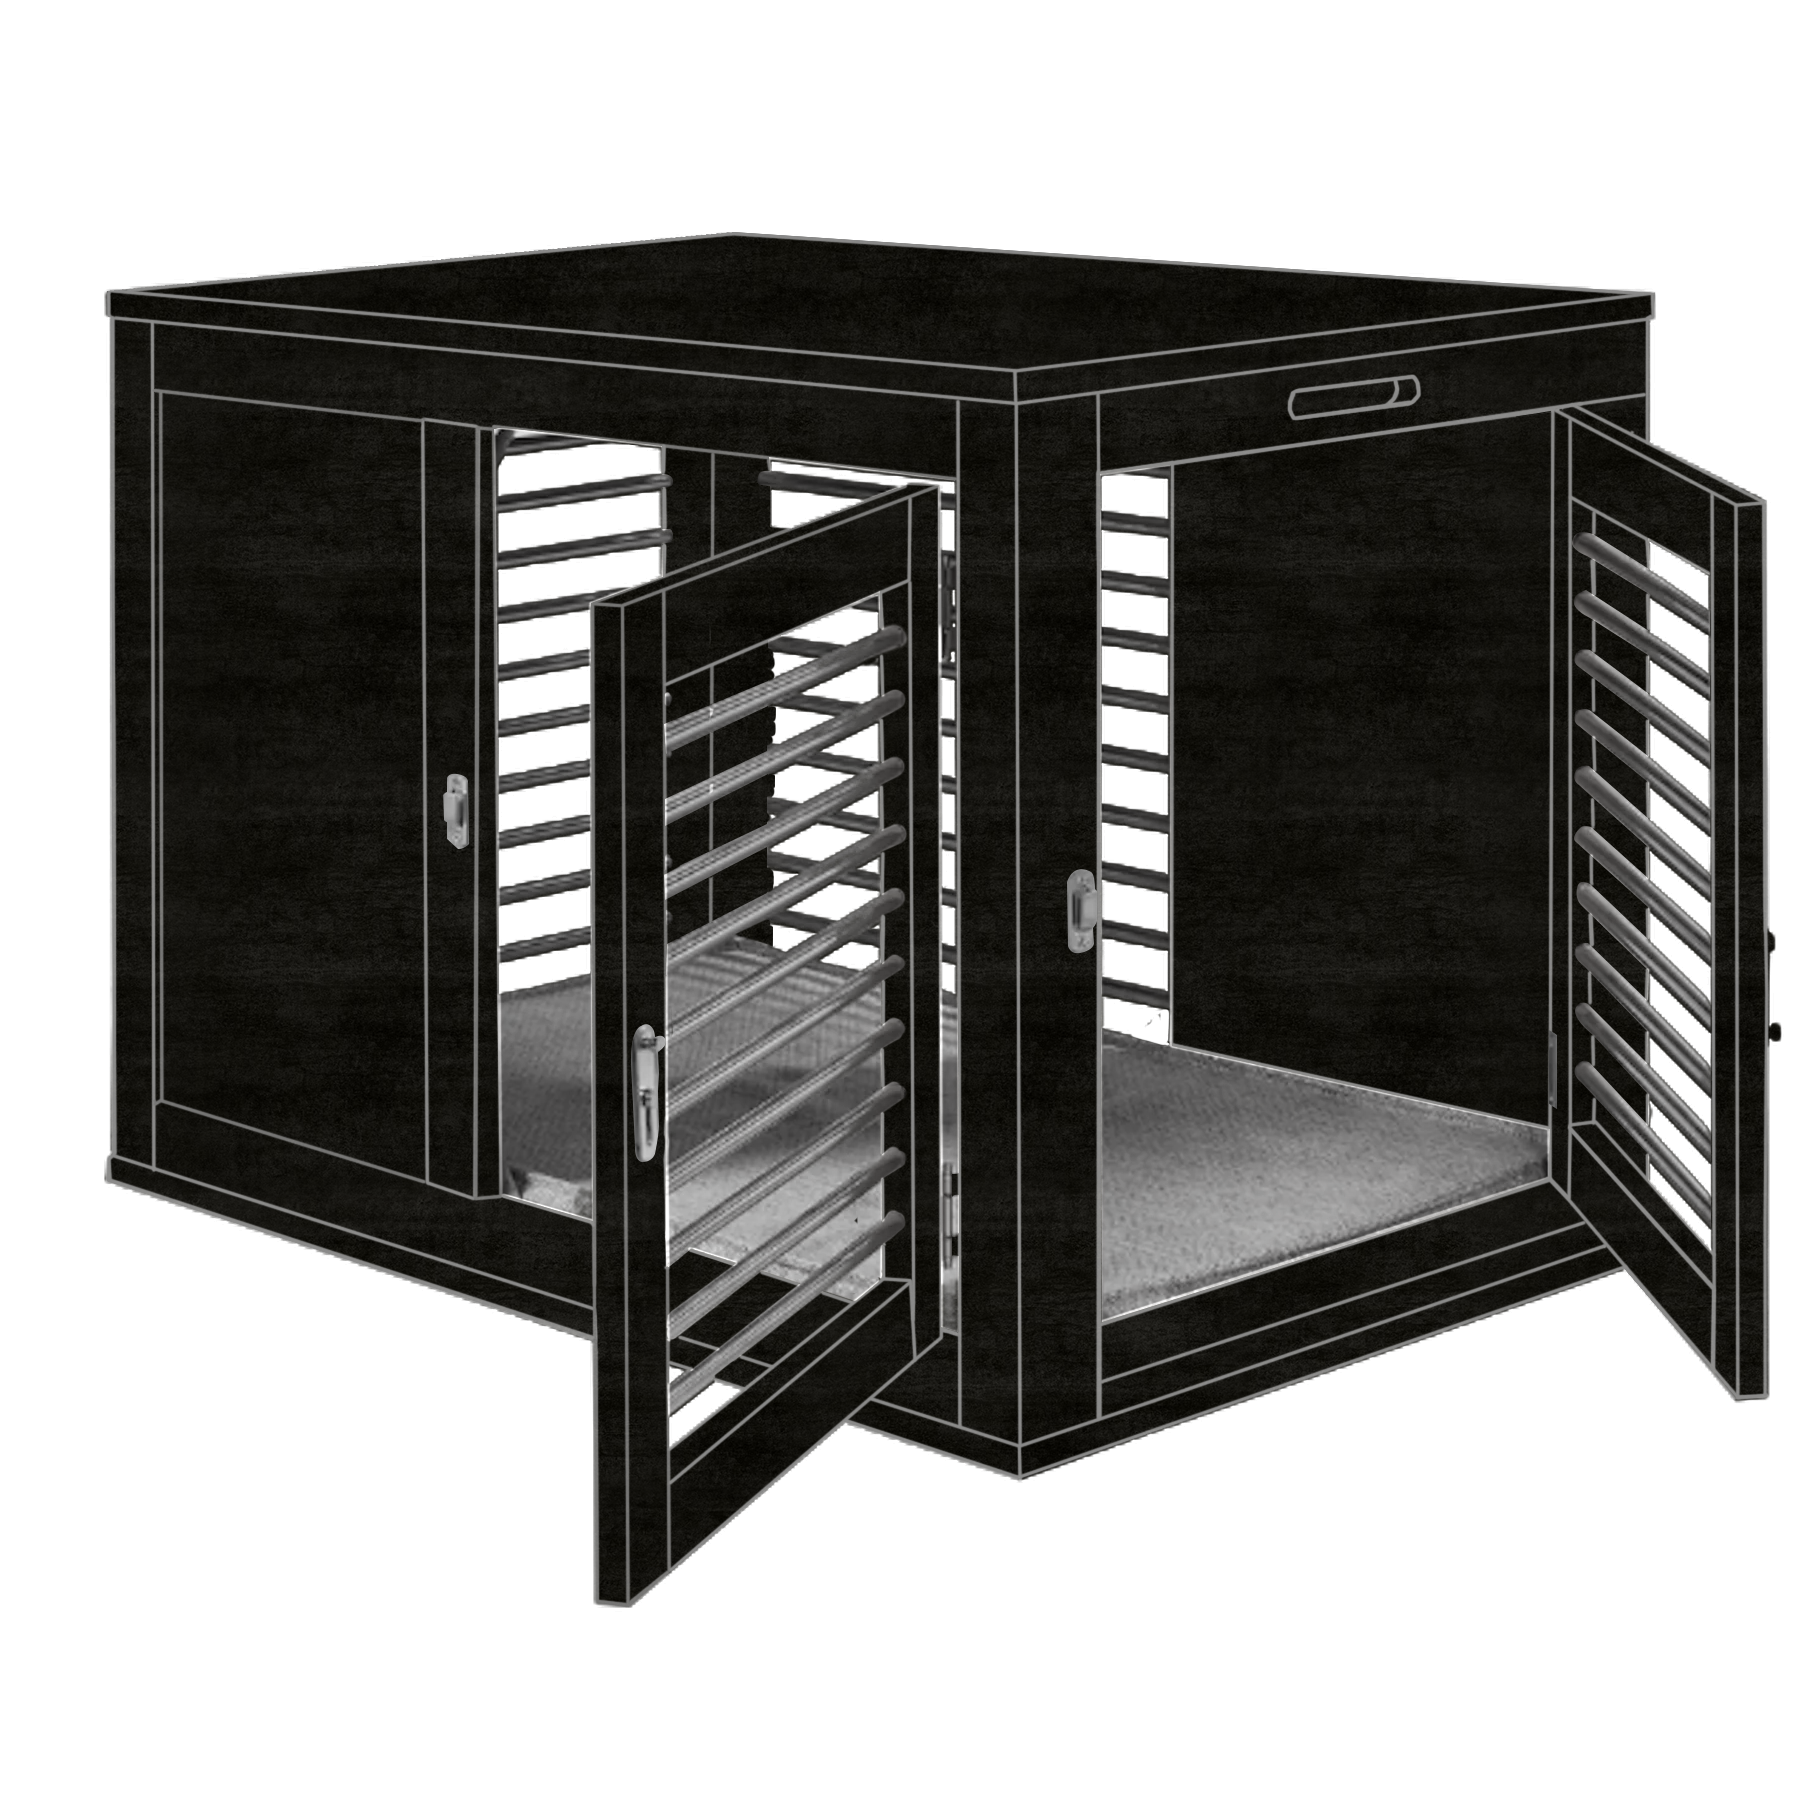 camera-obscura-abstract-black-moderno-crate-dog-kennel